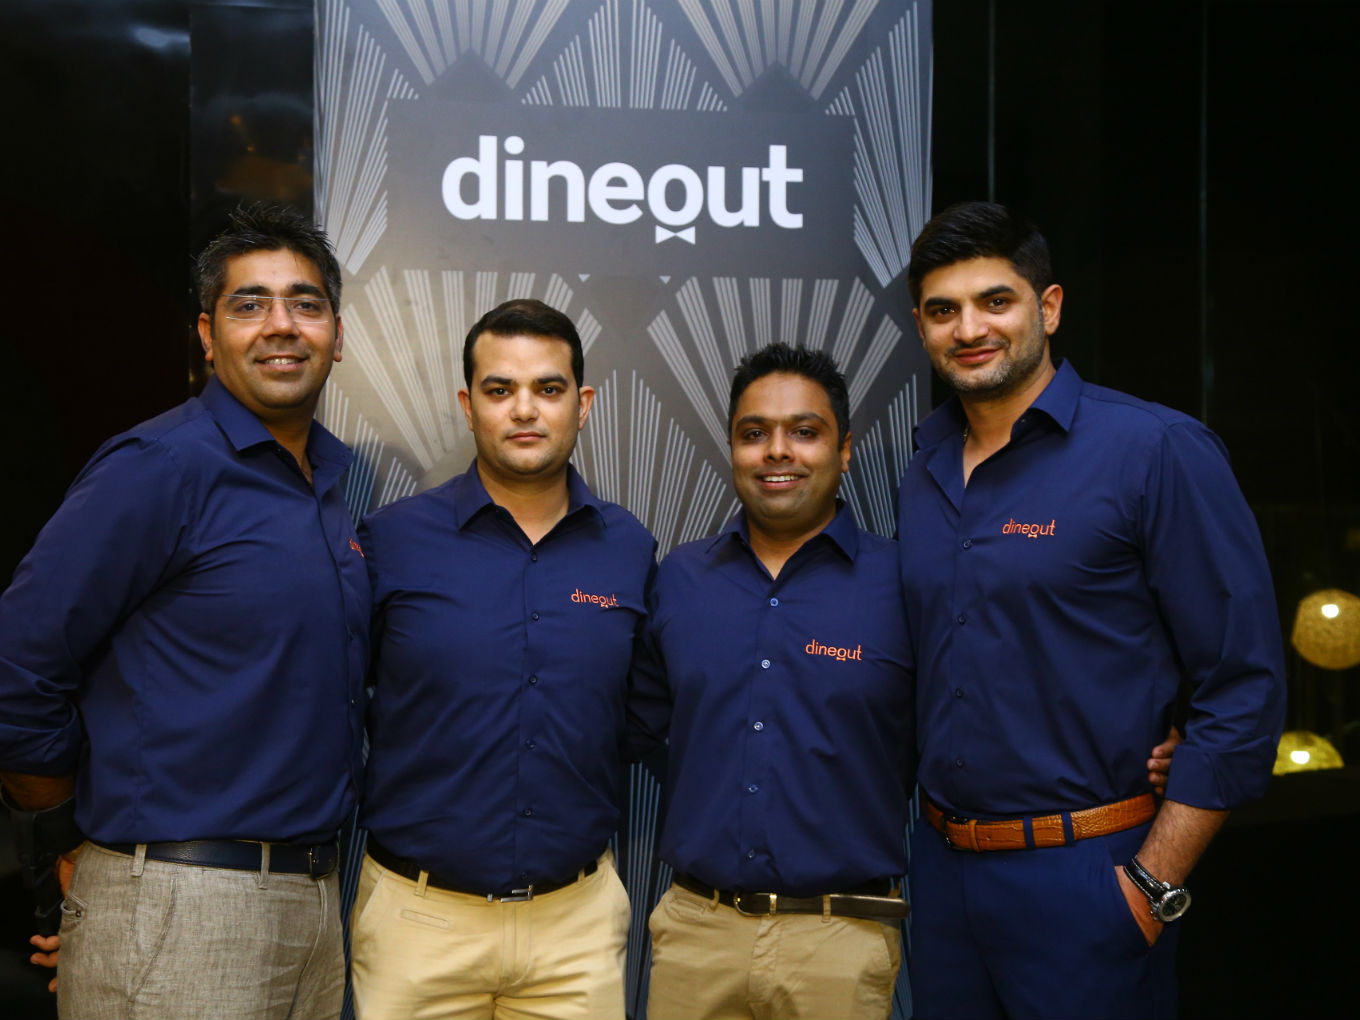 Amazon, Dineout Co-Create Marketplace For Restaurants’ Inventory Management